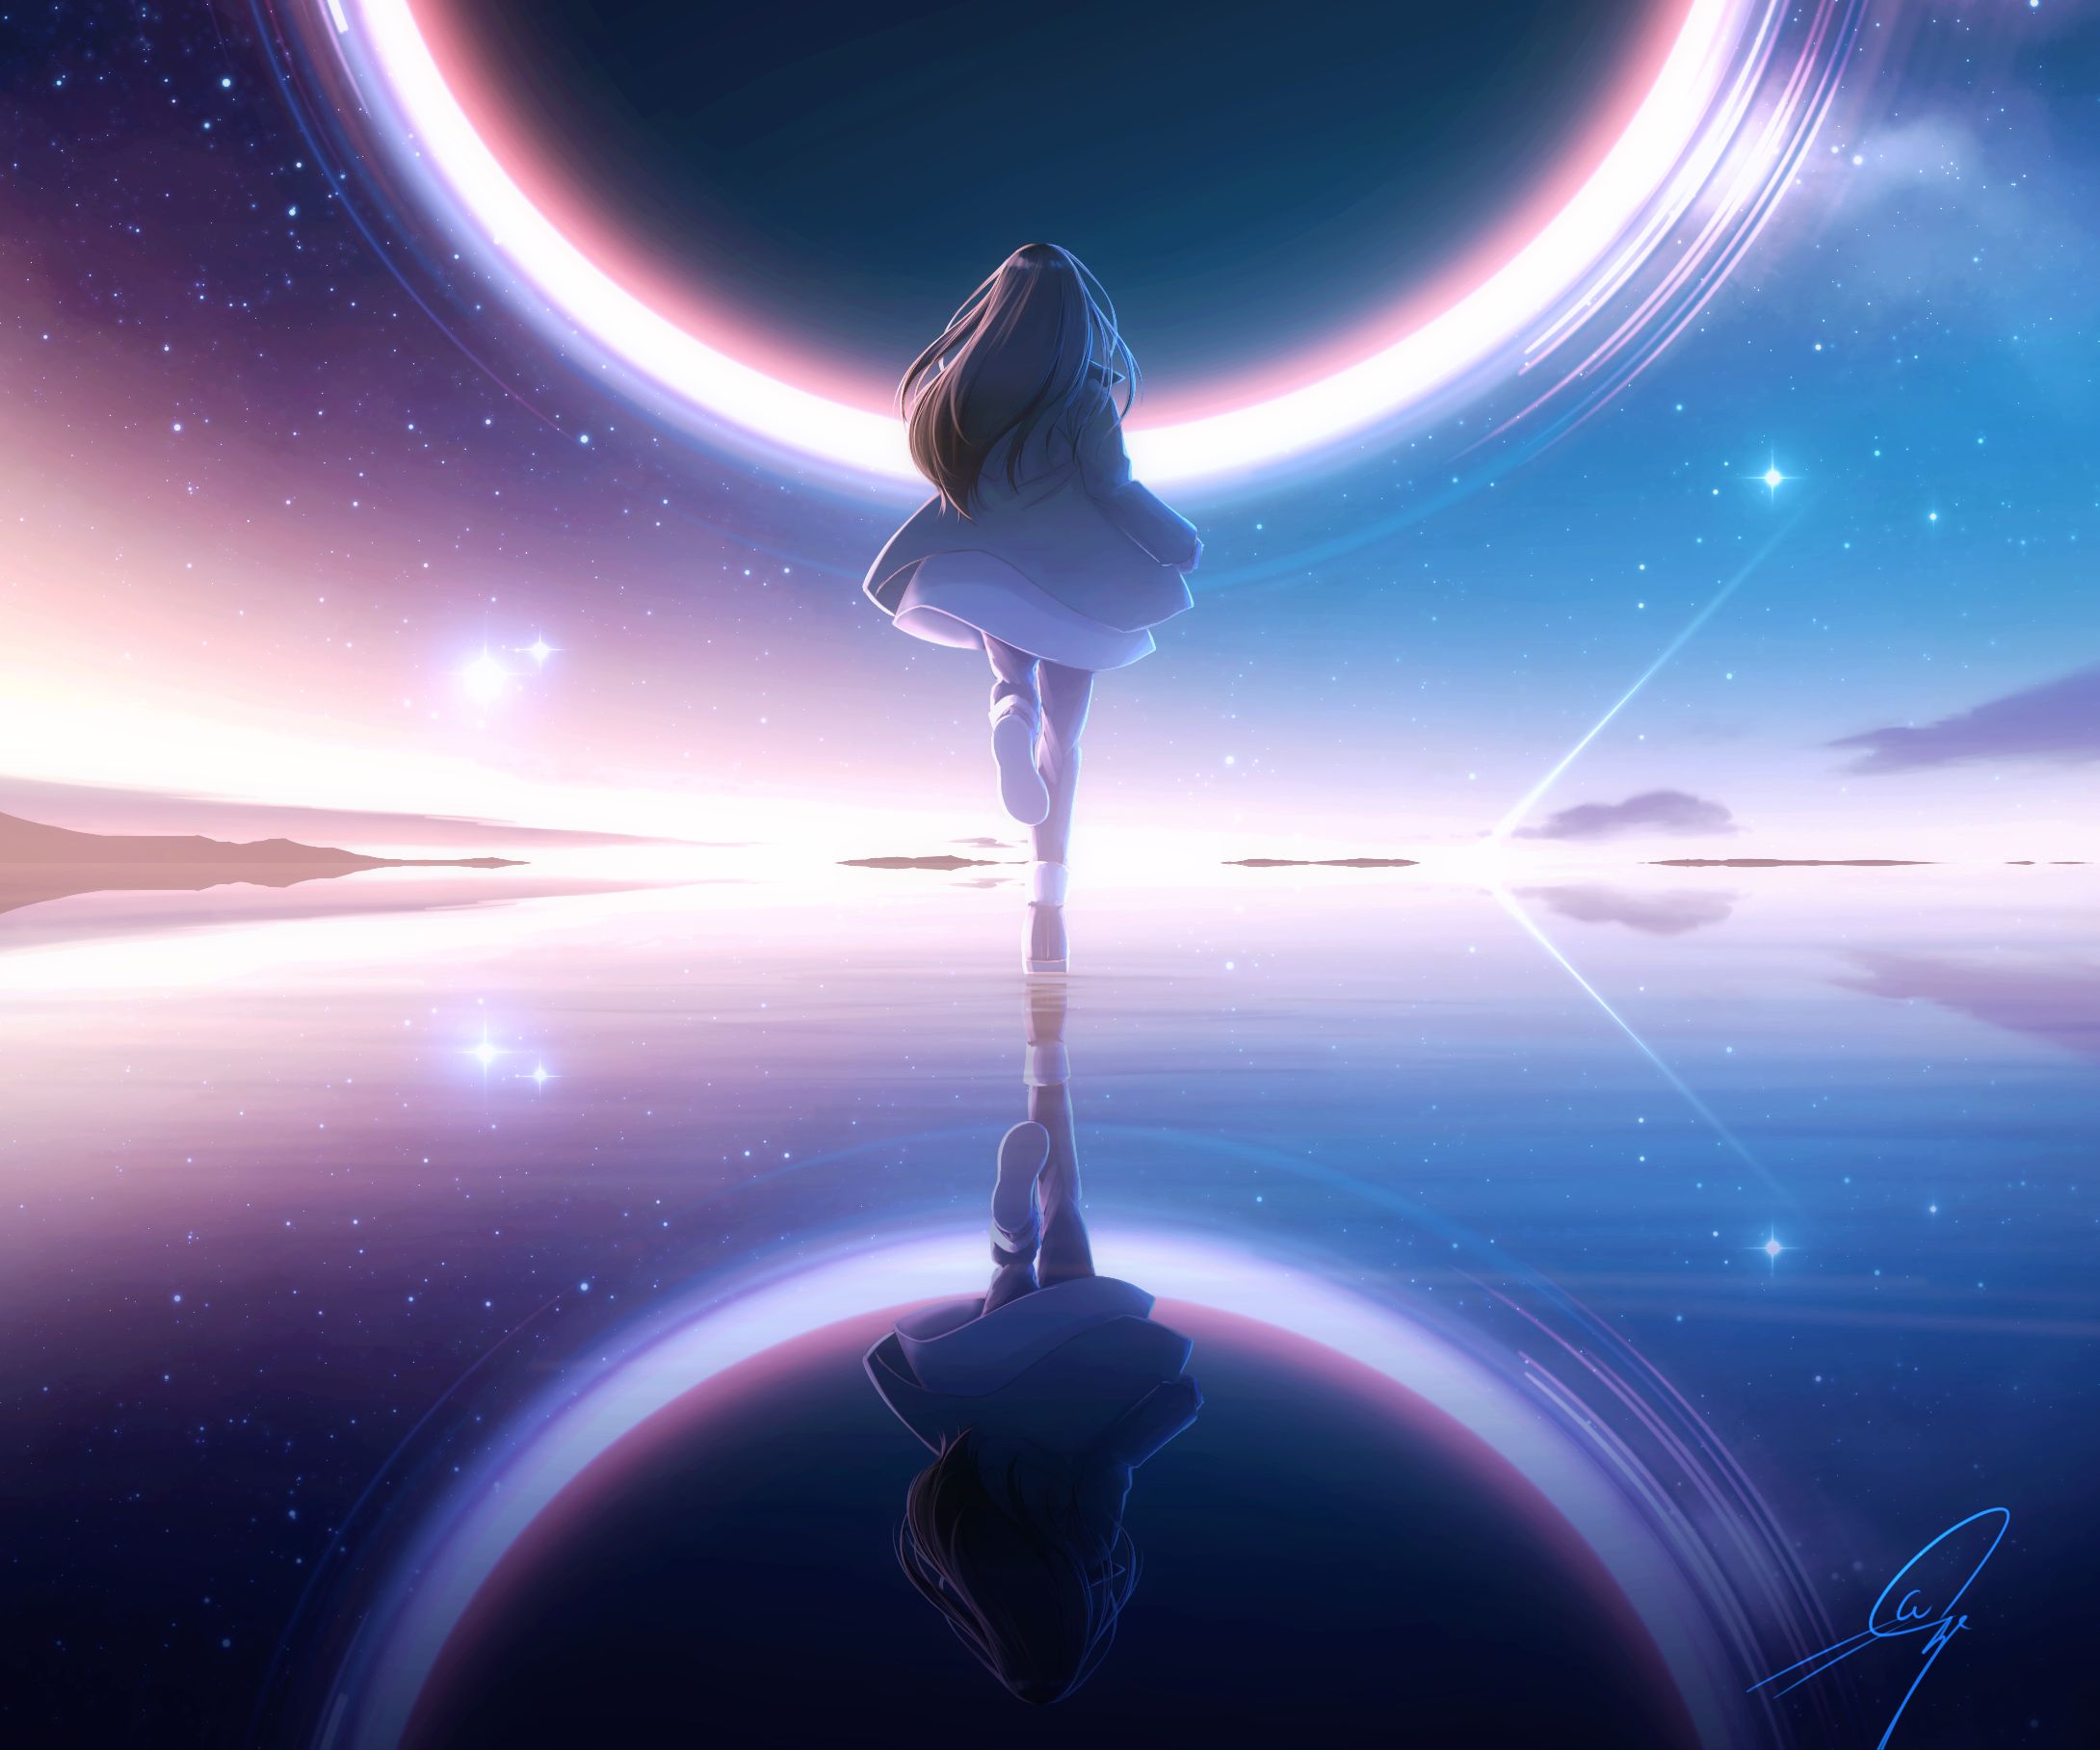 Free download wallpaper Anime, Reflection, Girl on your PC desktop